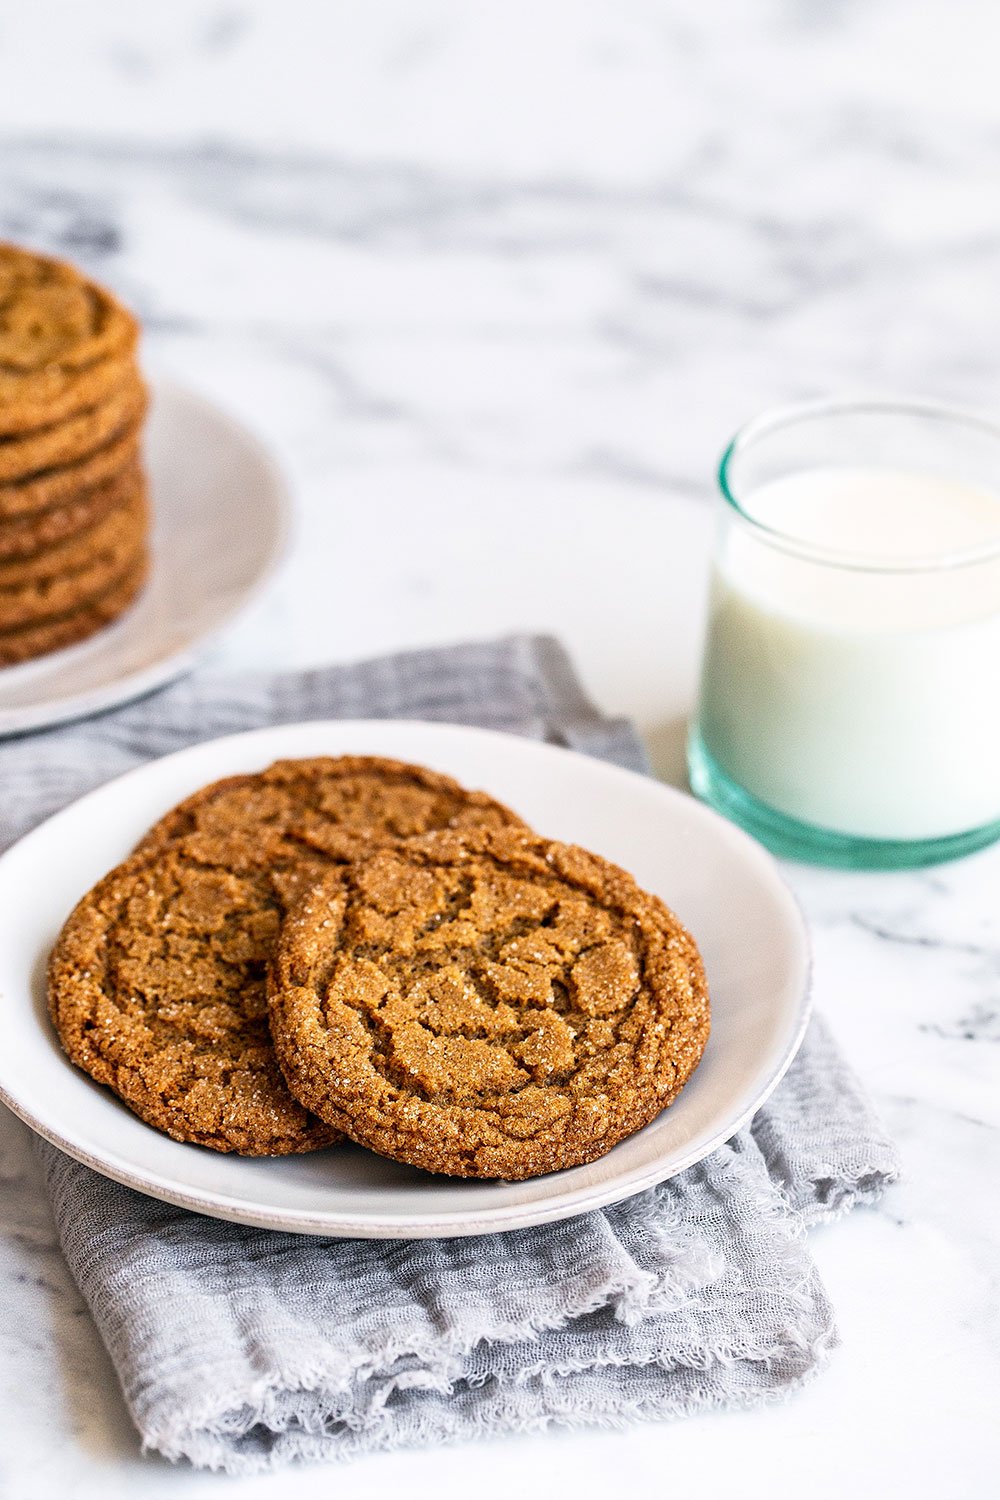 crispy, crunchy gingersnaps on a plate, beside a cold glass of milk